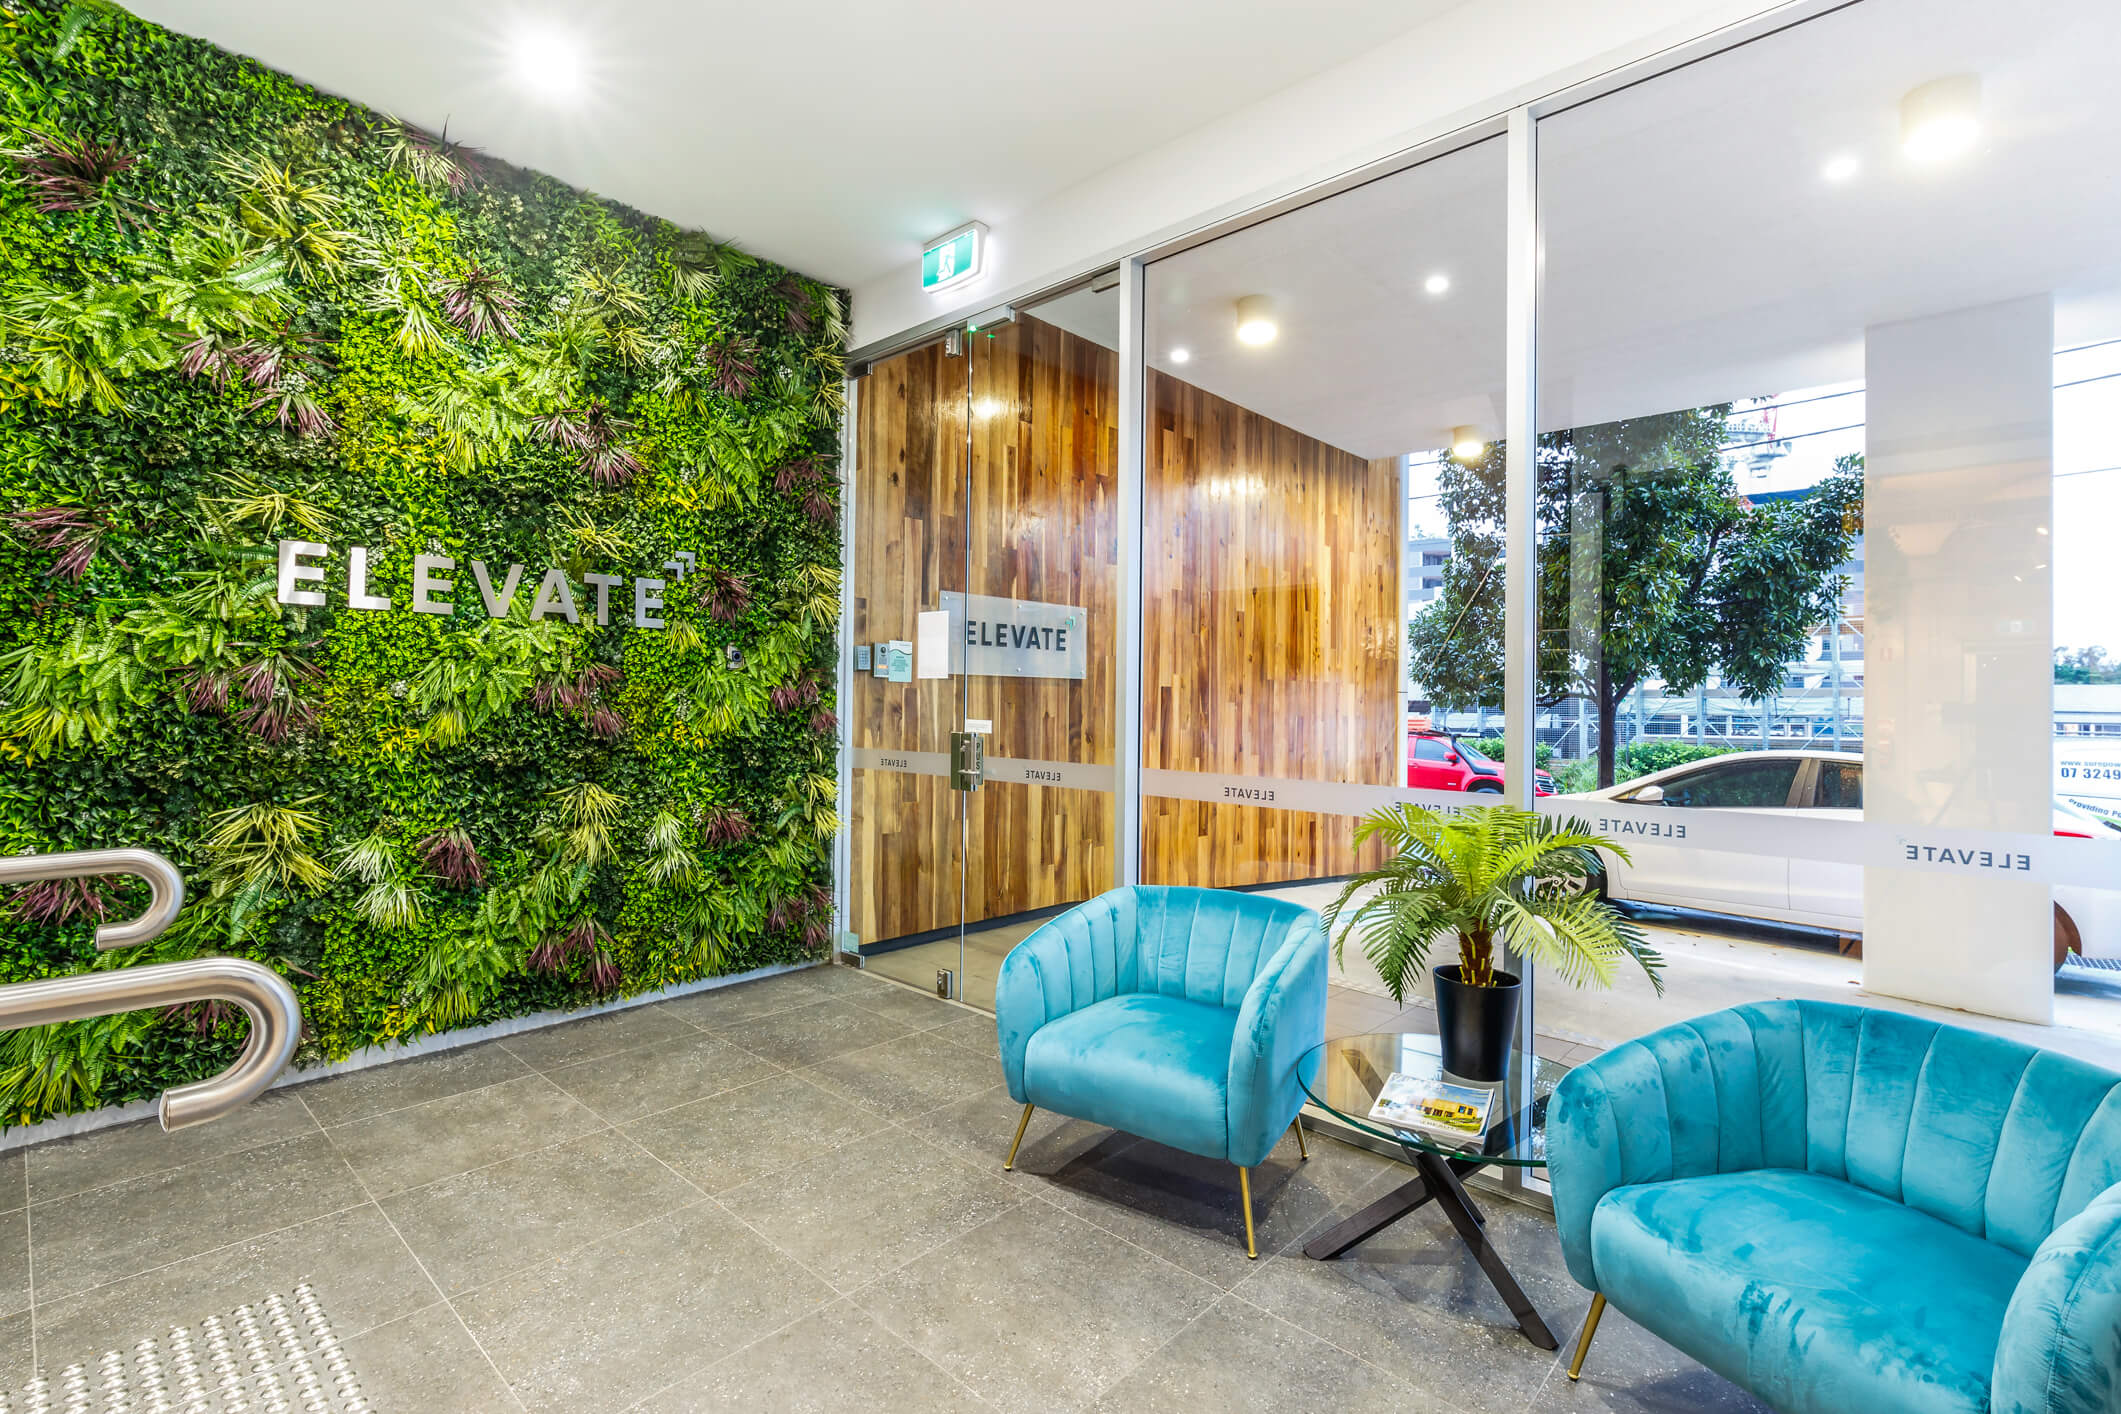 elevate communication office fitout interior design office space east brisbane raw commercial projects